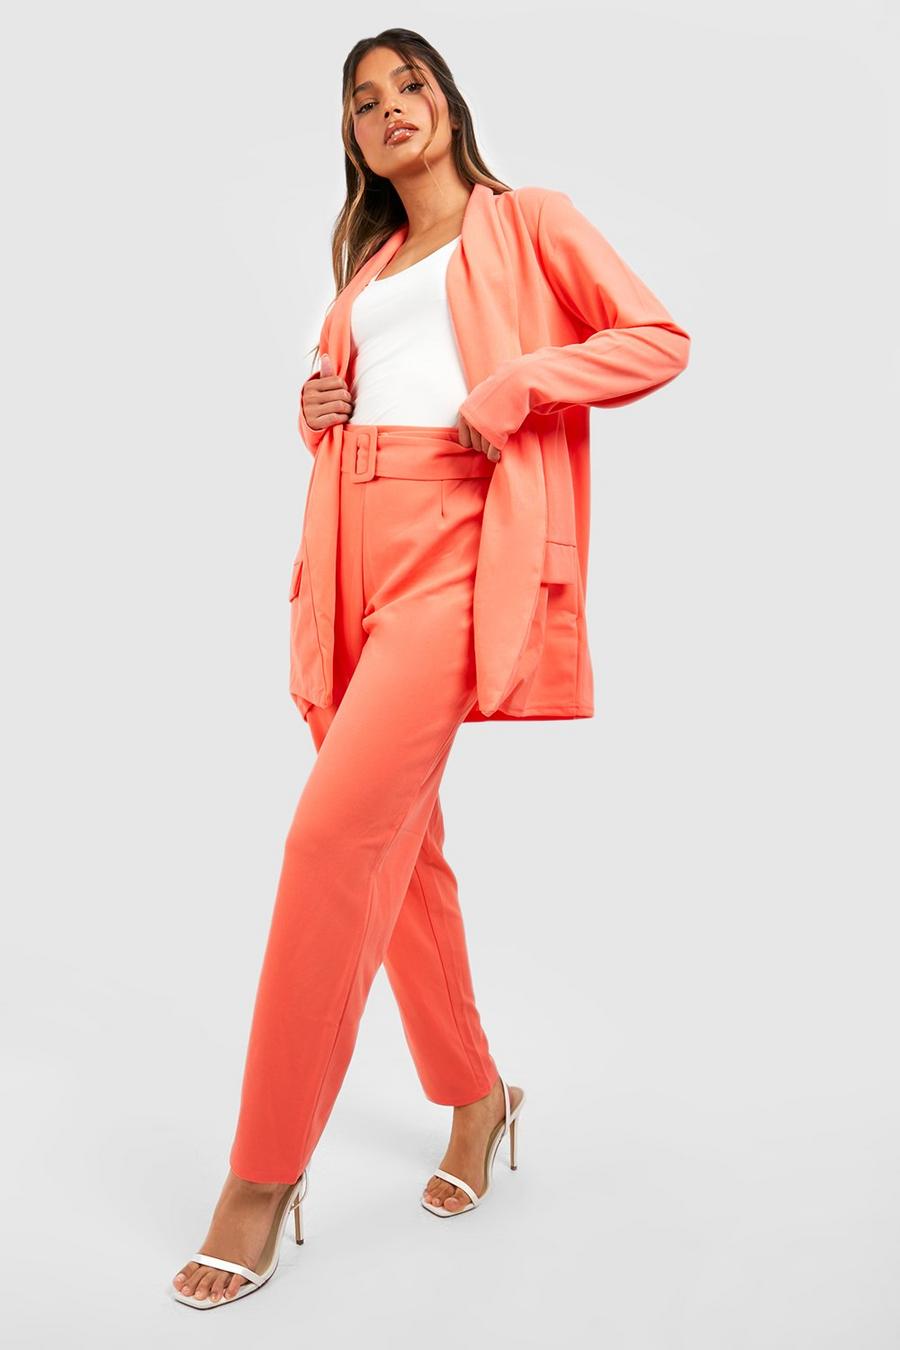 Coral rose Tailored Blazer And Self Fabric Belt Trouser Suit